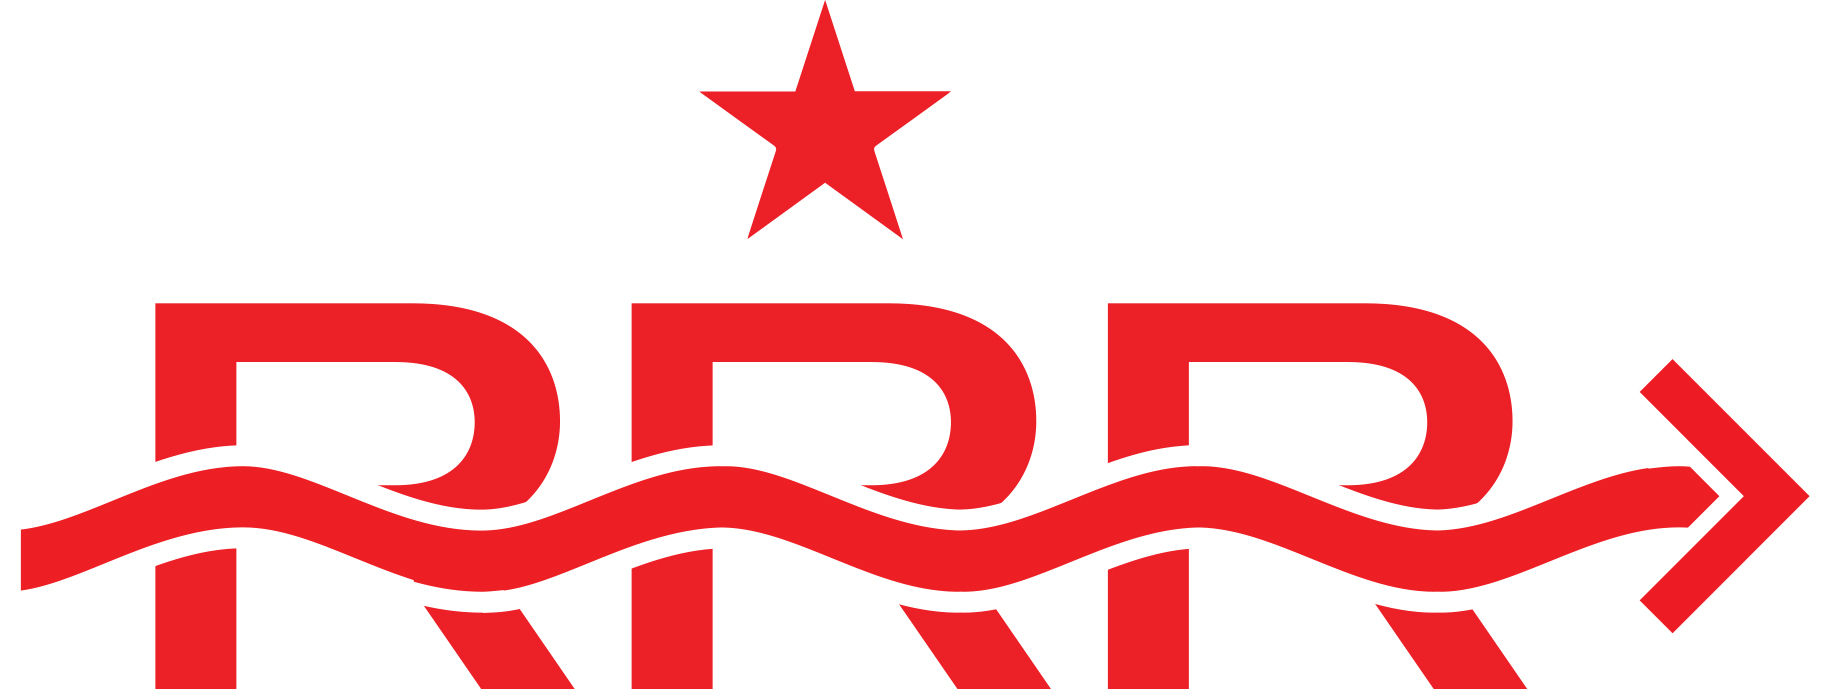 Red River Relay logo on RaceRaves